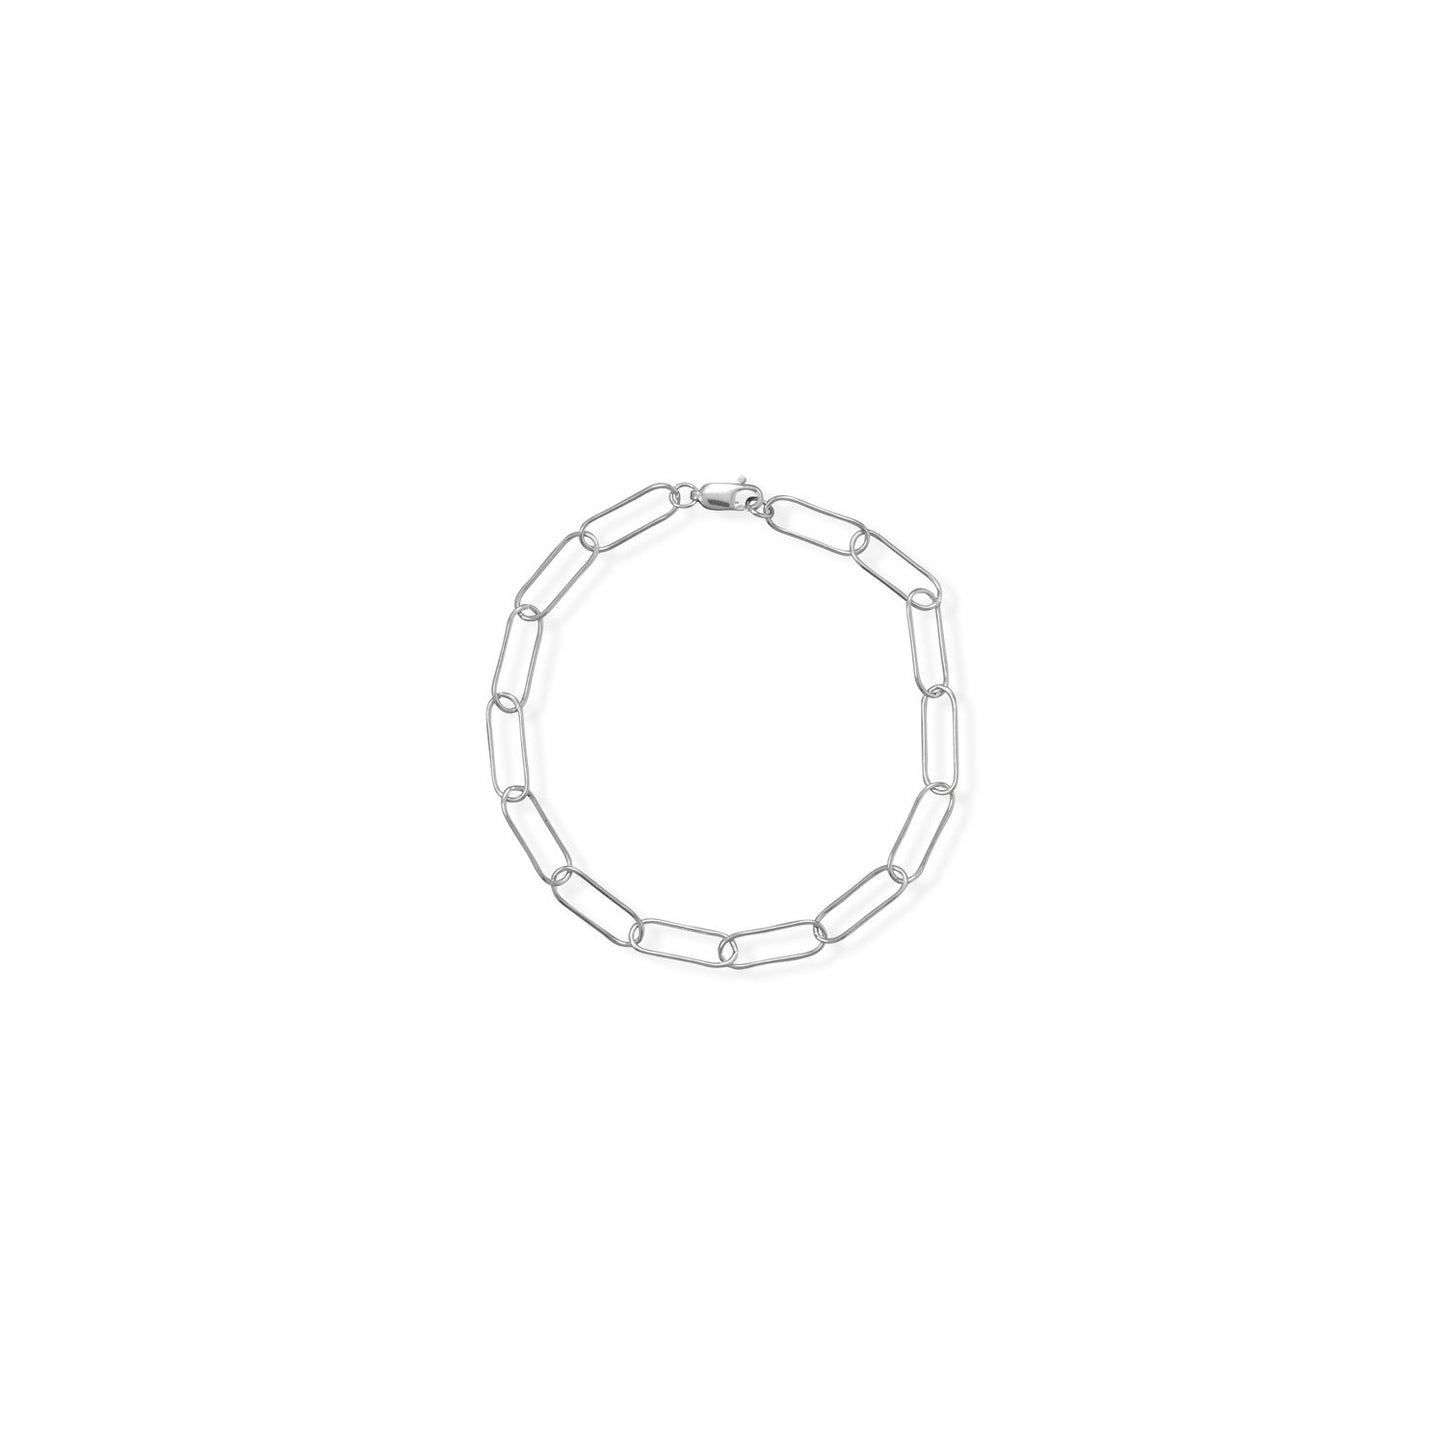 Rhodium Plated Sterling Silver 8" Paperclip Bracelet